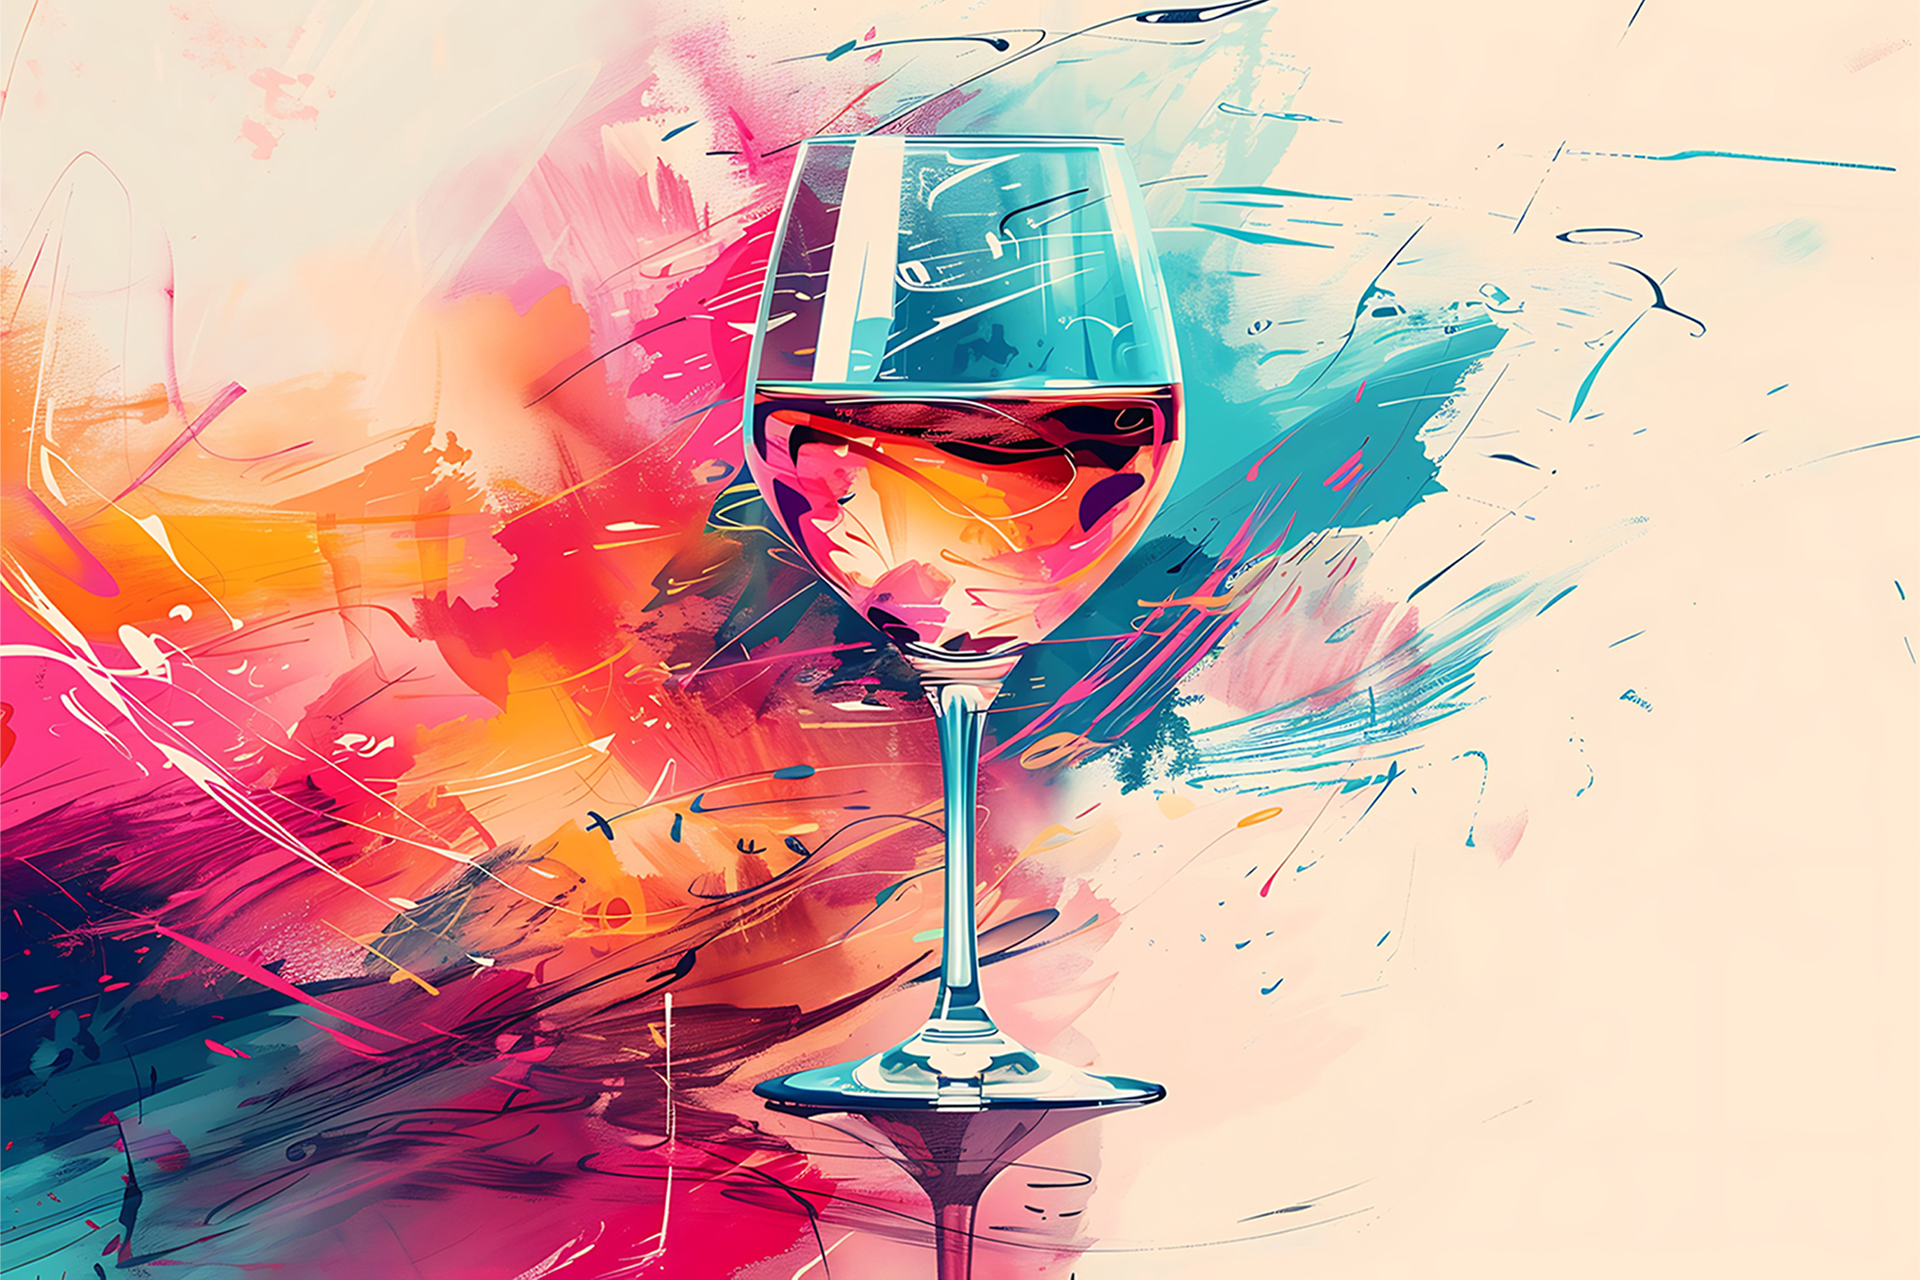 We invite you to a unique "Wine & Paint" event at the Boutique Hotel Esplanade